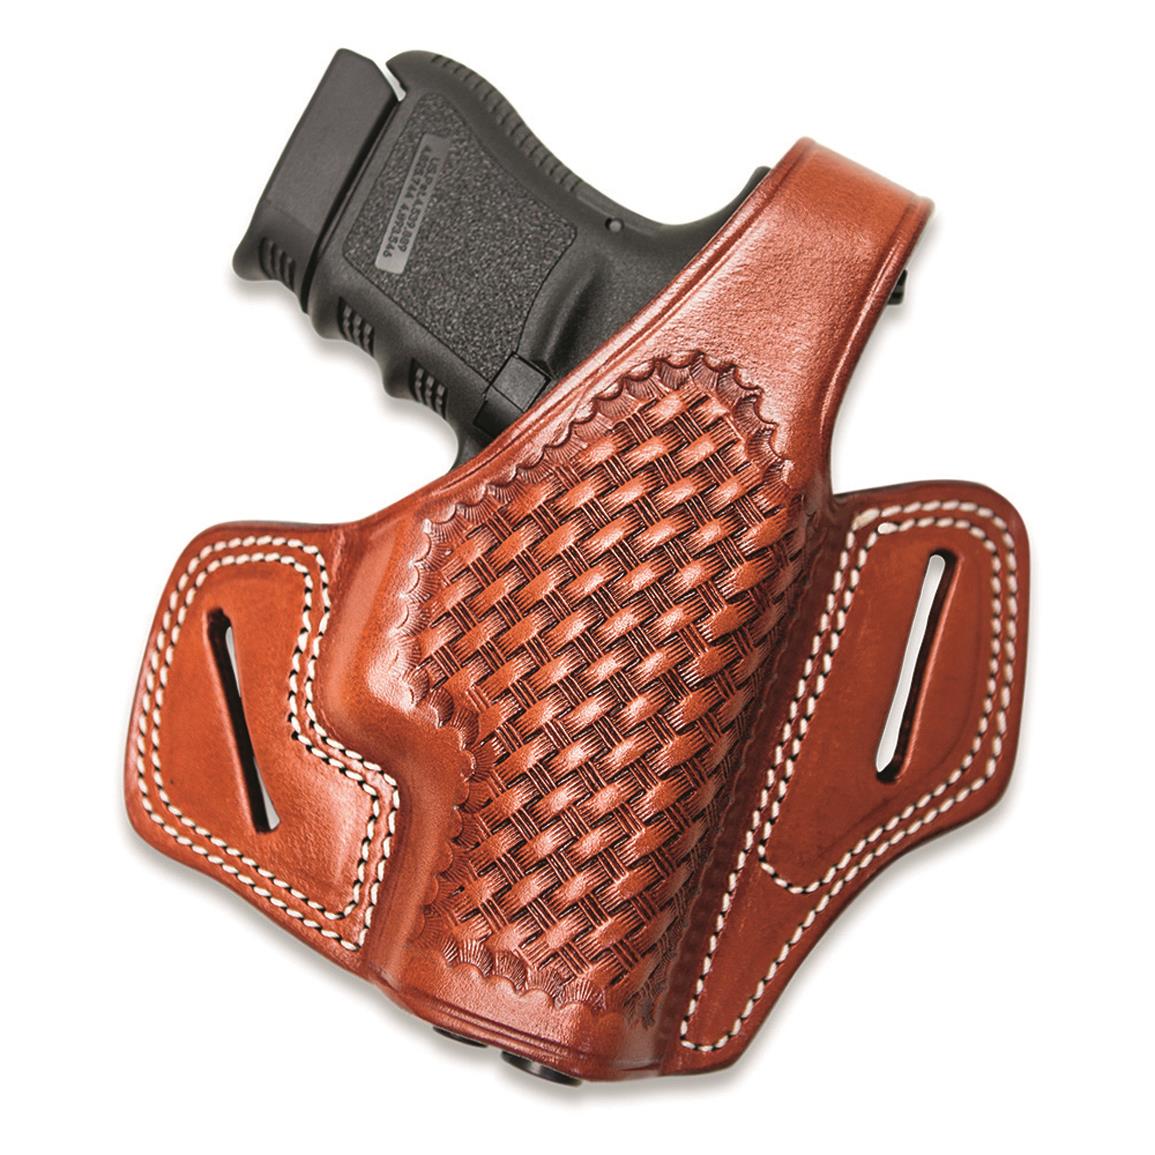 Cebeci Arms Leather Basketweave Pancake Holster, Springfield XD9/XD40 4" Compact, Right Hand